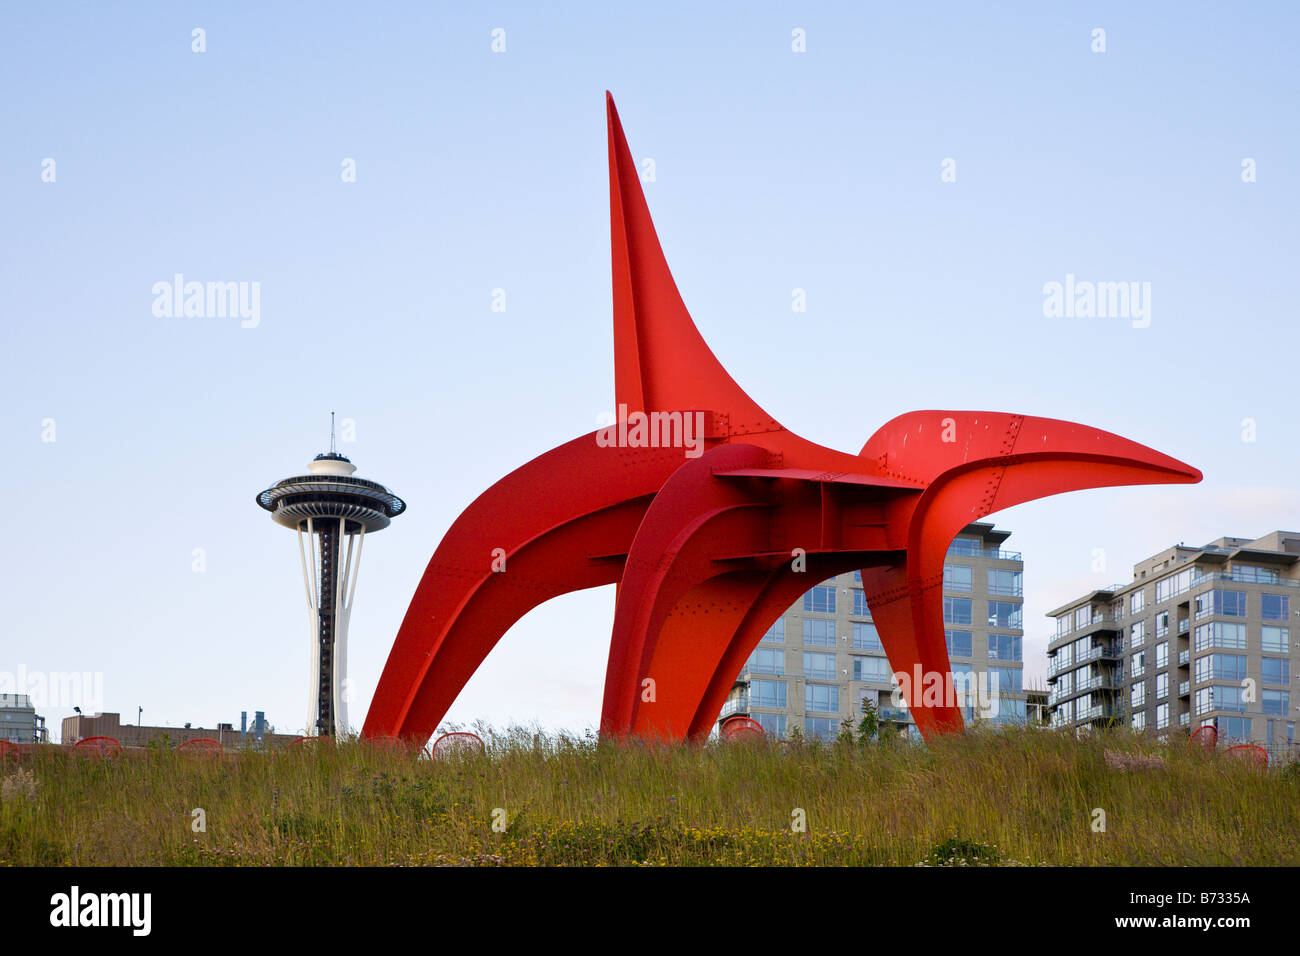 Eagle sculpture by Alexander Calder at Olympic Sculpture Park in Seattle, Washington, USA Stock Photo